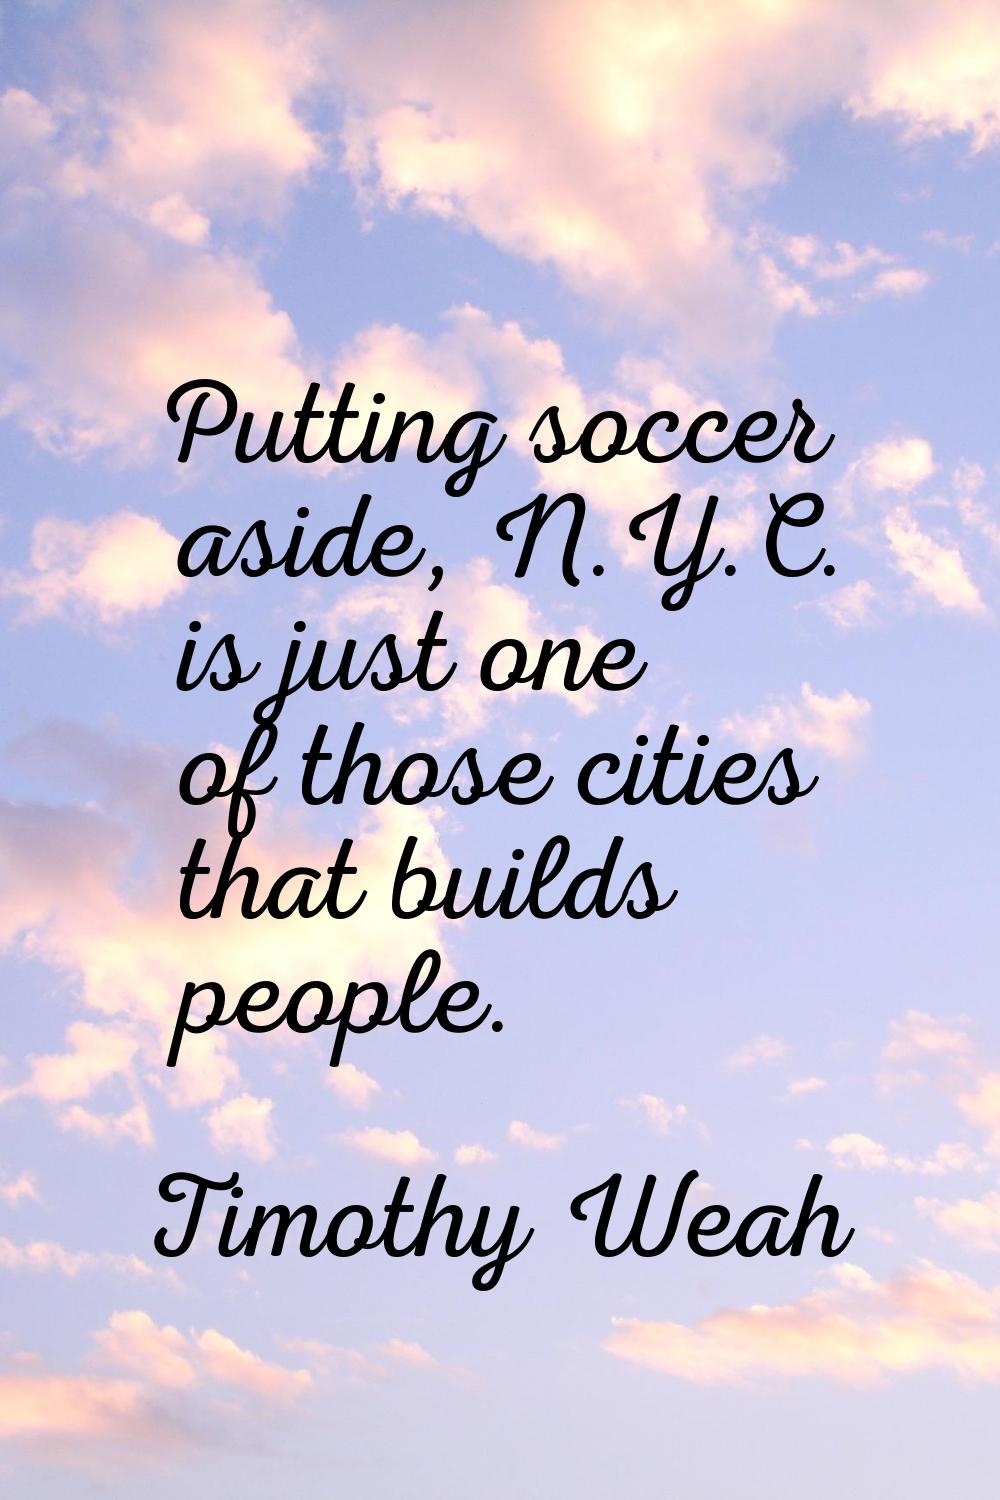 Putting soccer aside, N.Y.C. is just one of those cities that builds people.